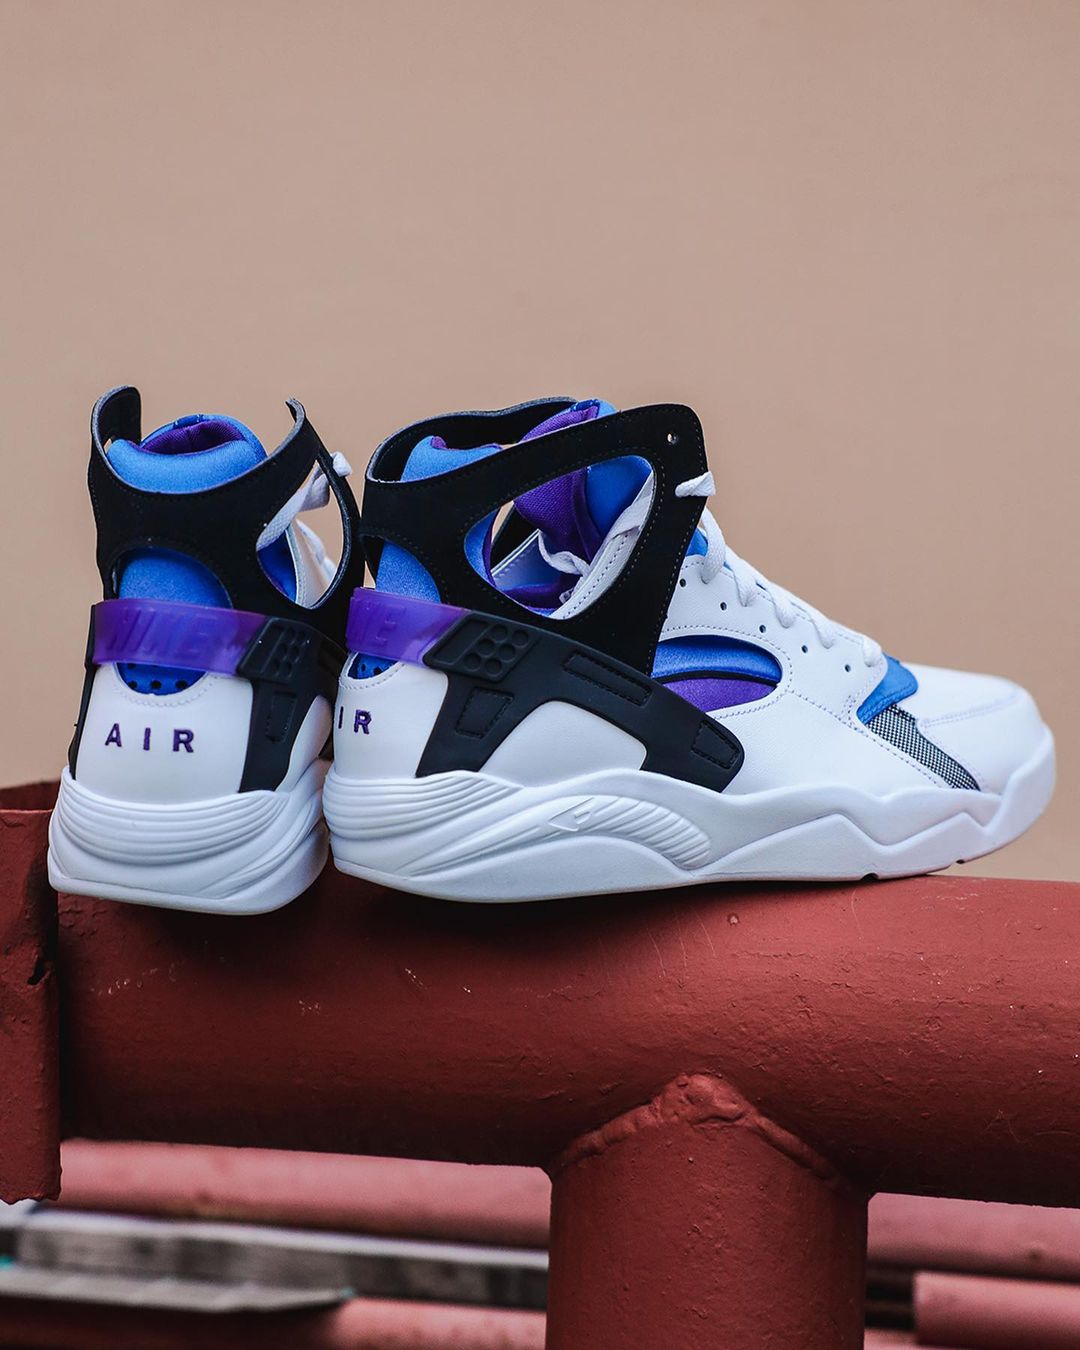 Sneaker News on Twitter: "Who still waiting for the Nike Air Flight Huarache's retro? 🙋 The pair has already returned overseas. / Twitter